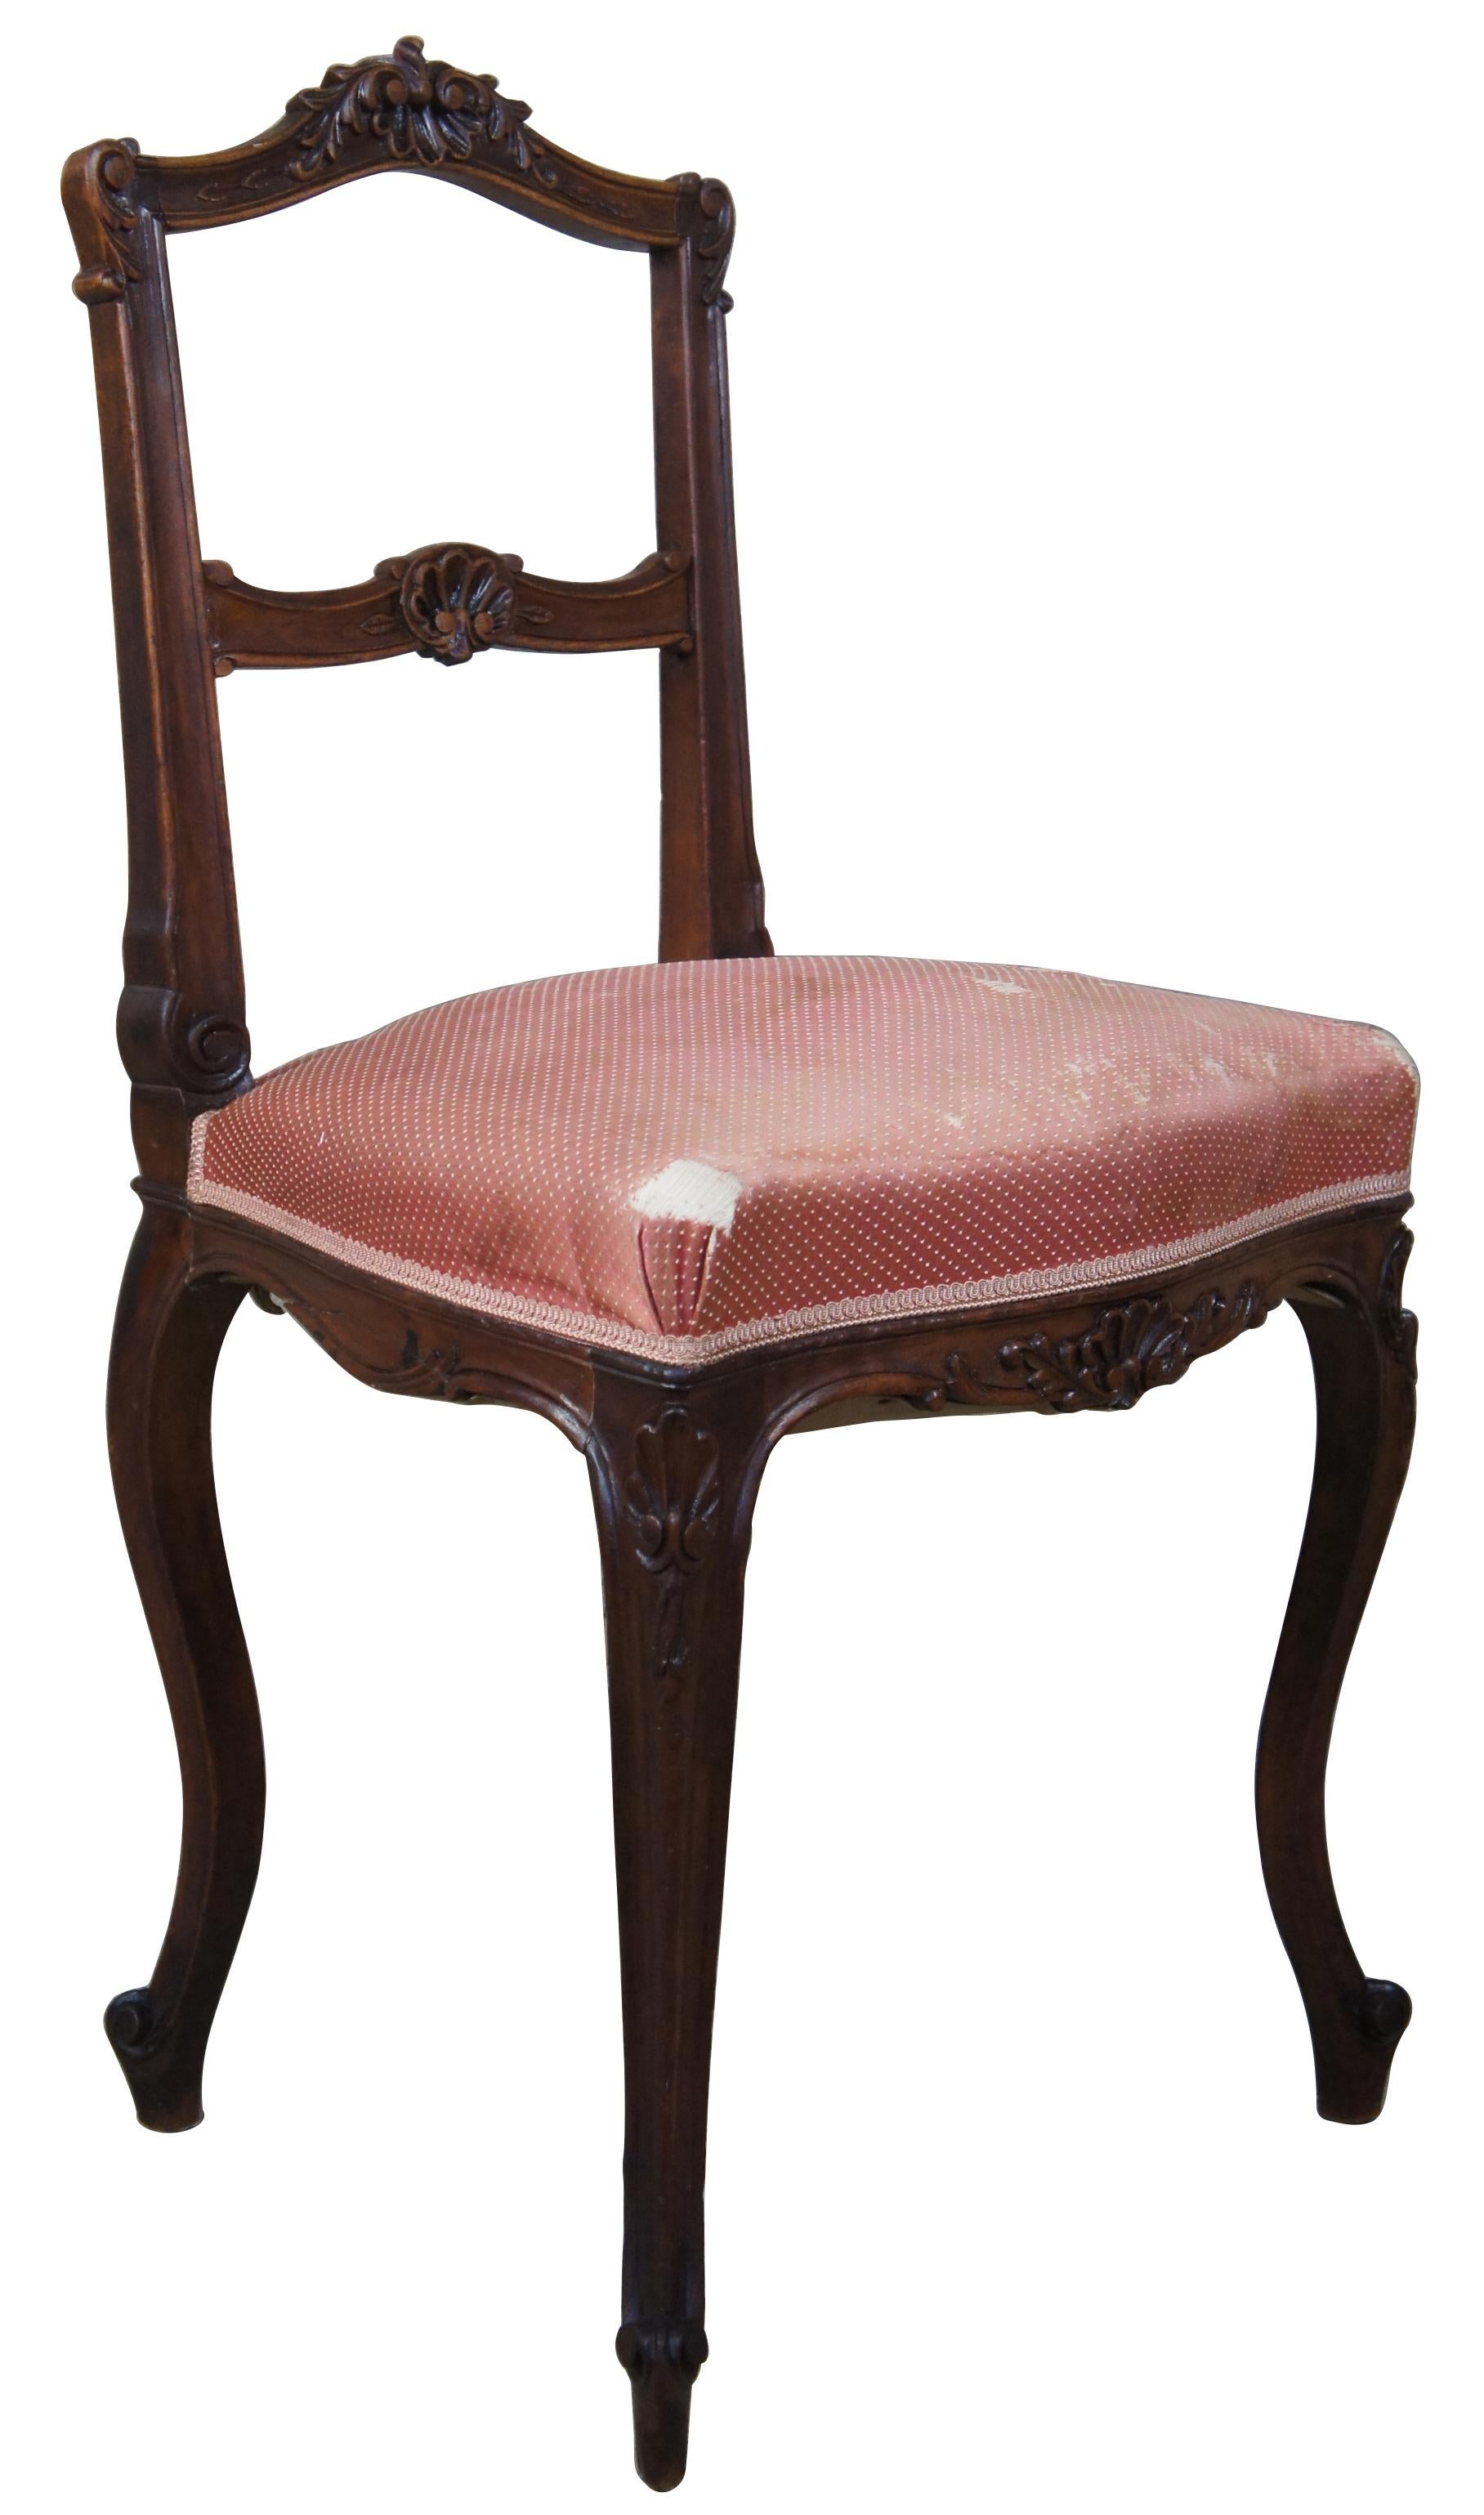 Antique French Provincial side chair. Made from walnut with ornate shell and cartouche carvings. Features a pink upholstery over cabriole legs and scrolled deet.
  